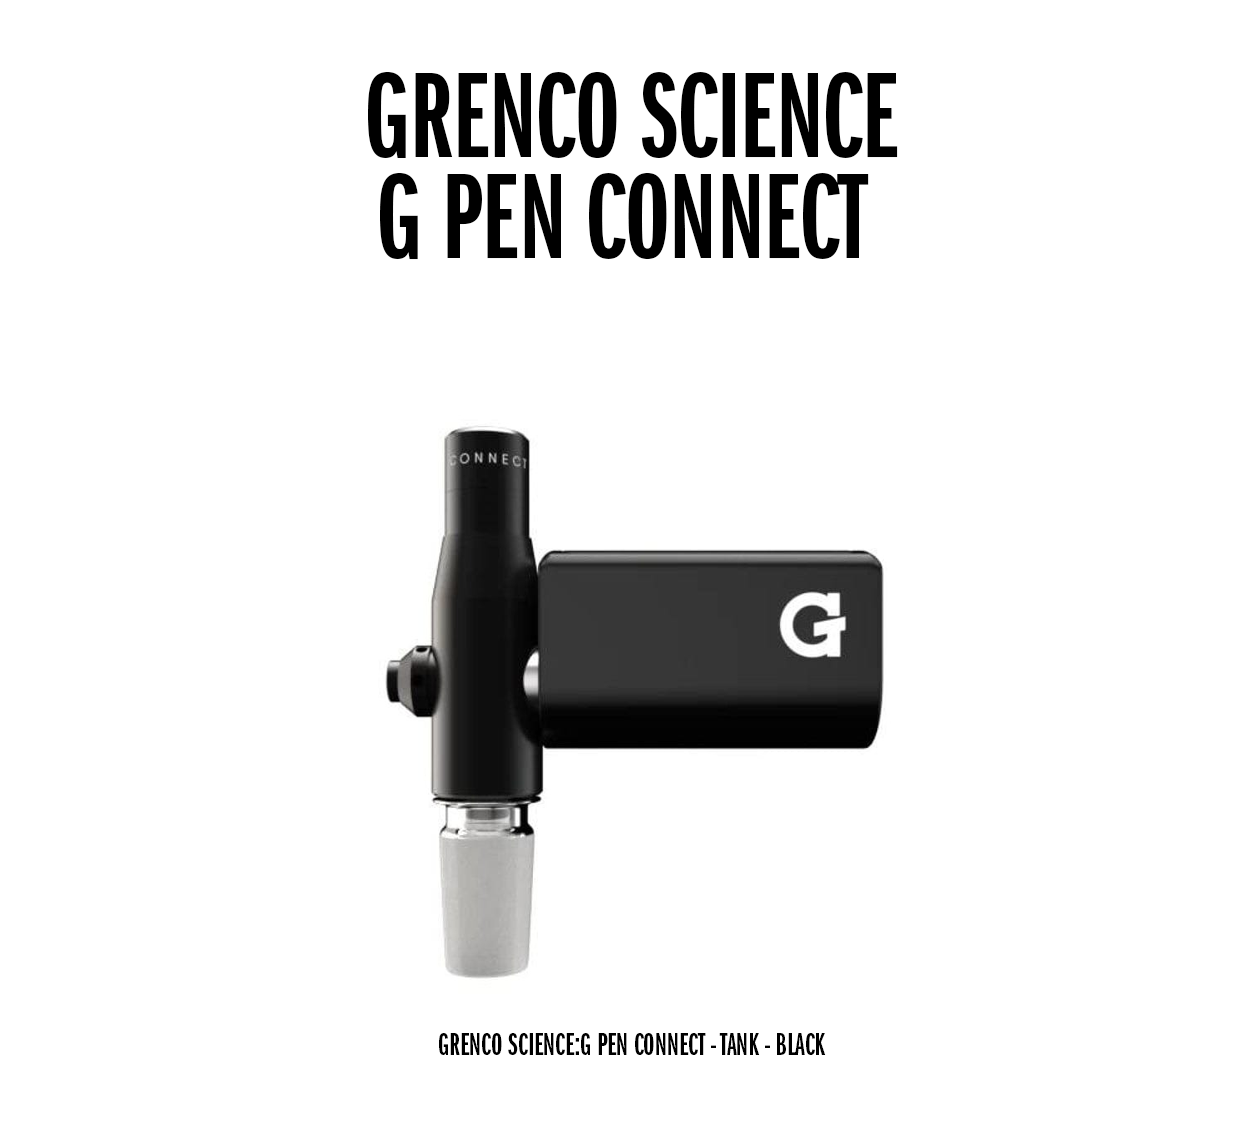 Grenco Science:G Pen Connect - Tank - Black